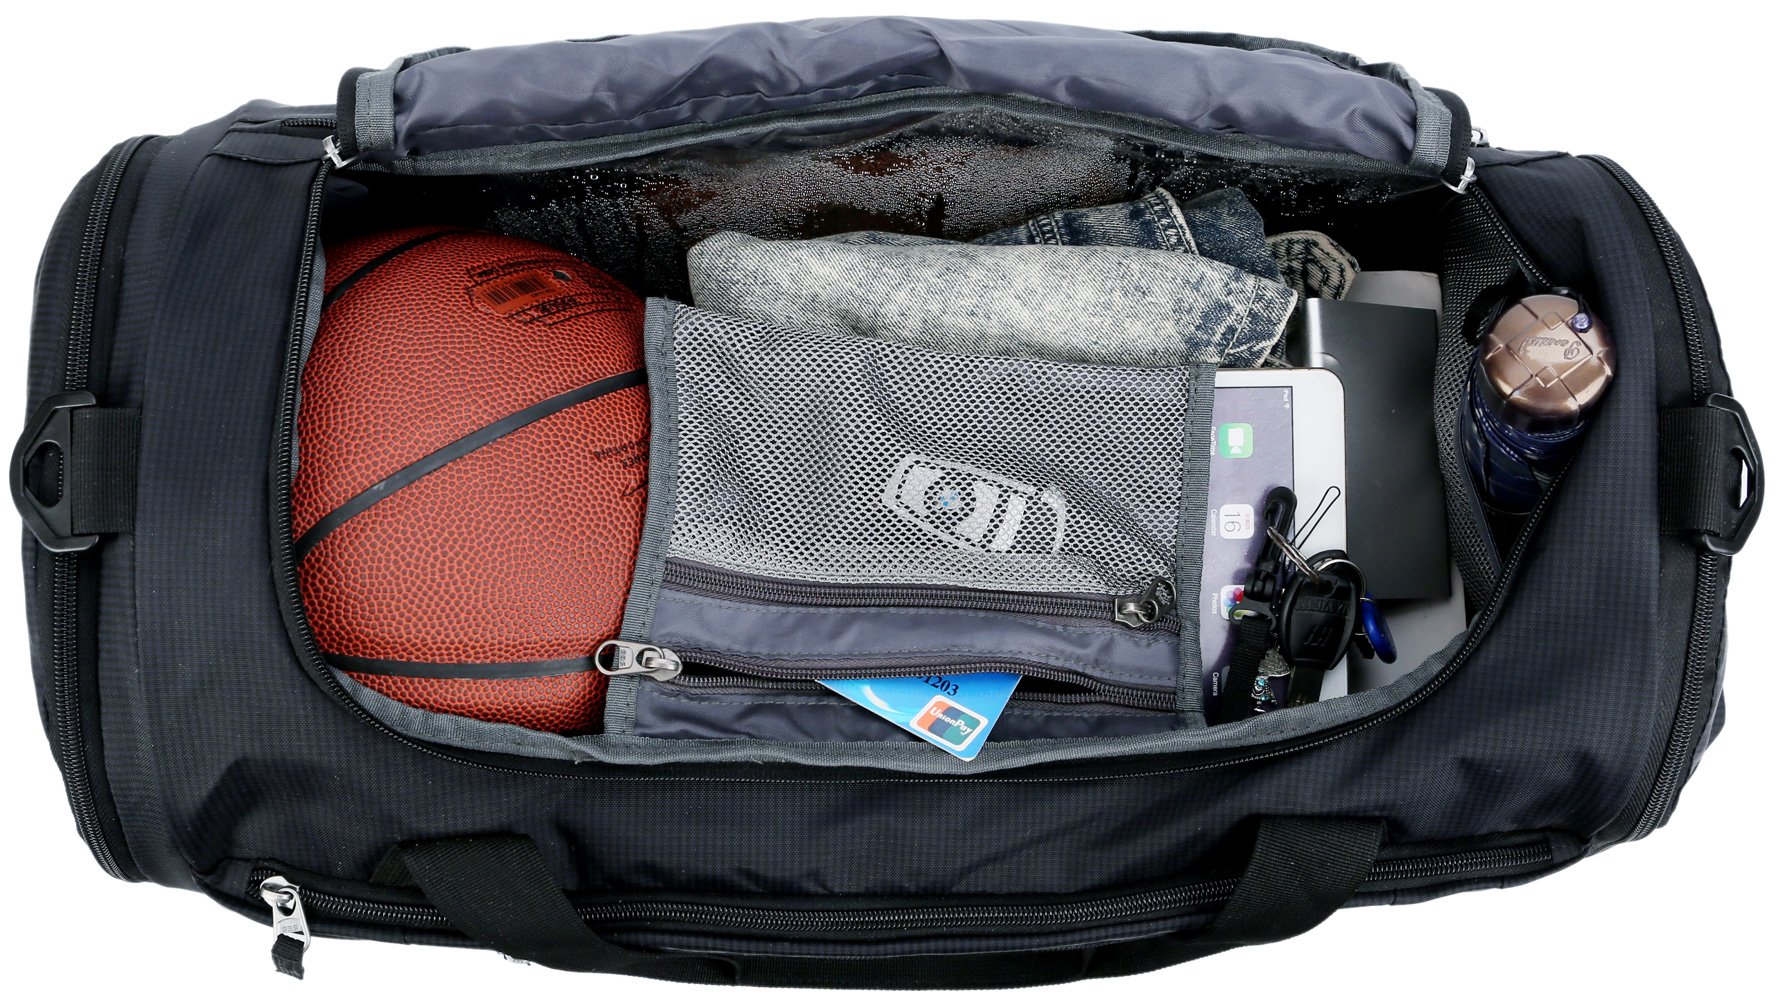 Gymbag-large-capacity-waterproof-multi-compartment-2